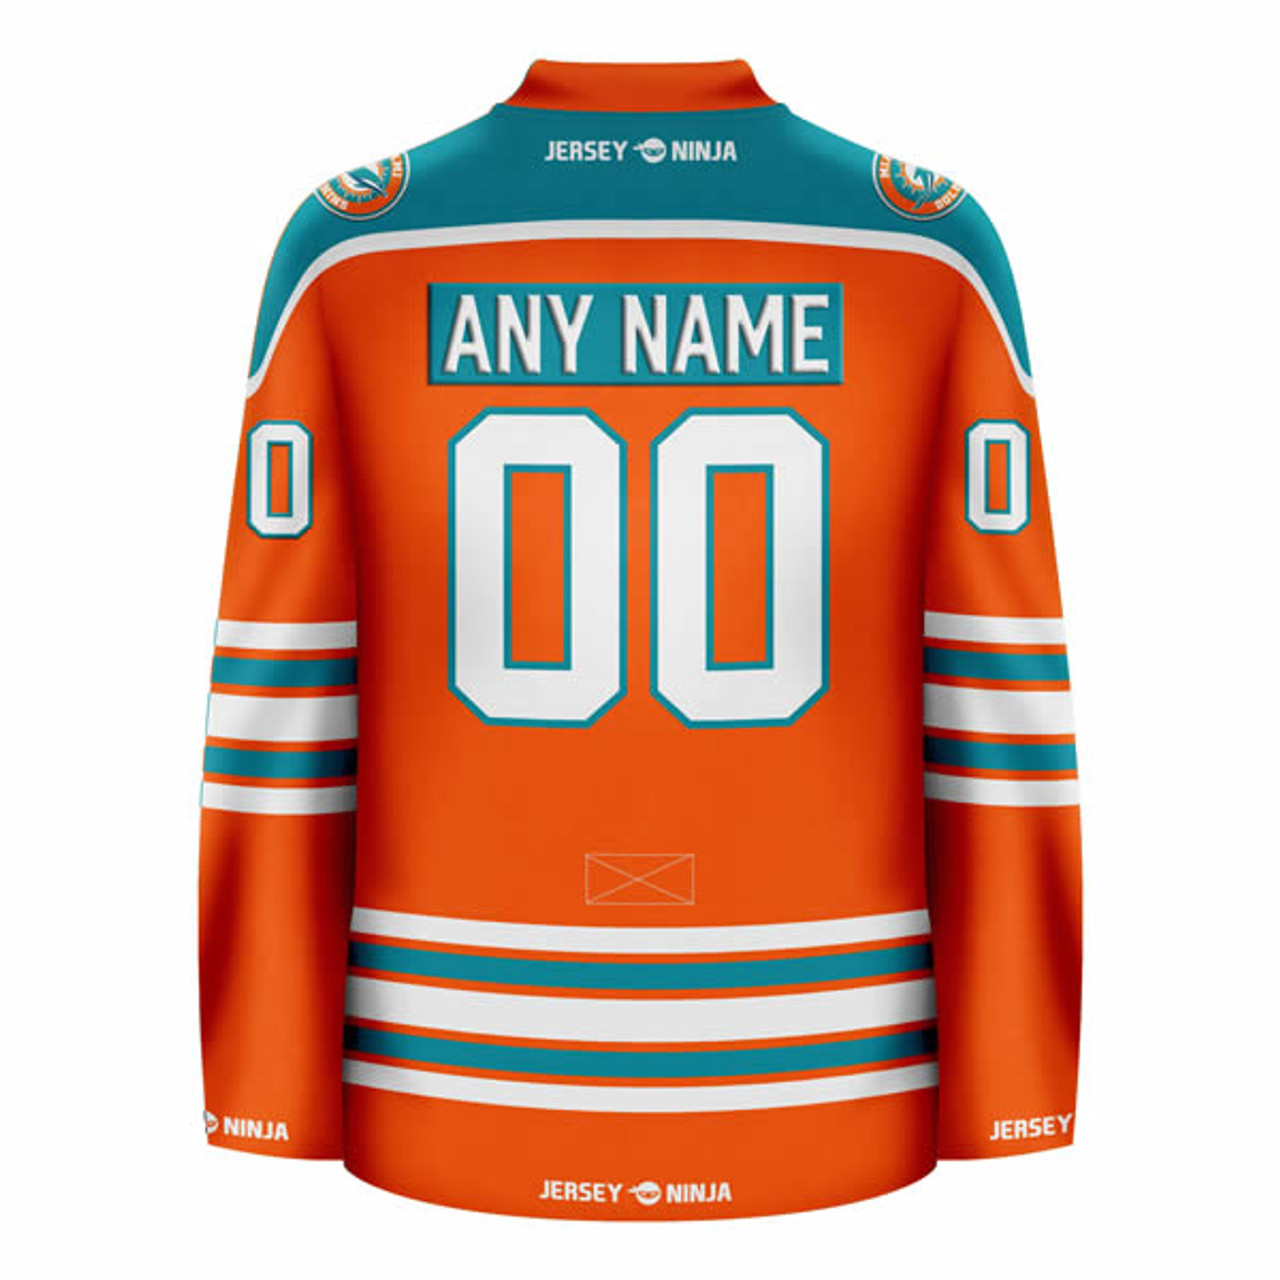 The Phinsider weighs in on the Miami Dolphins Orange Jersey - The